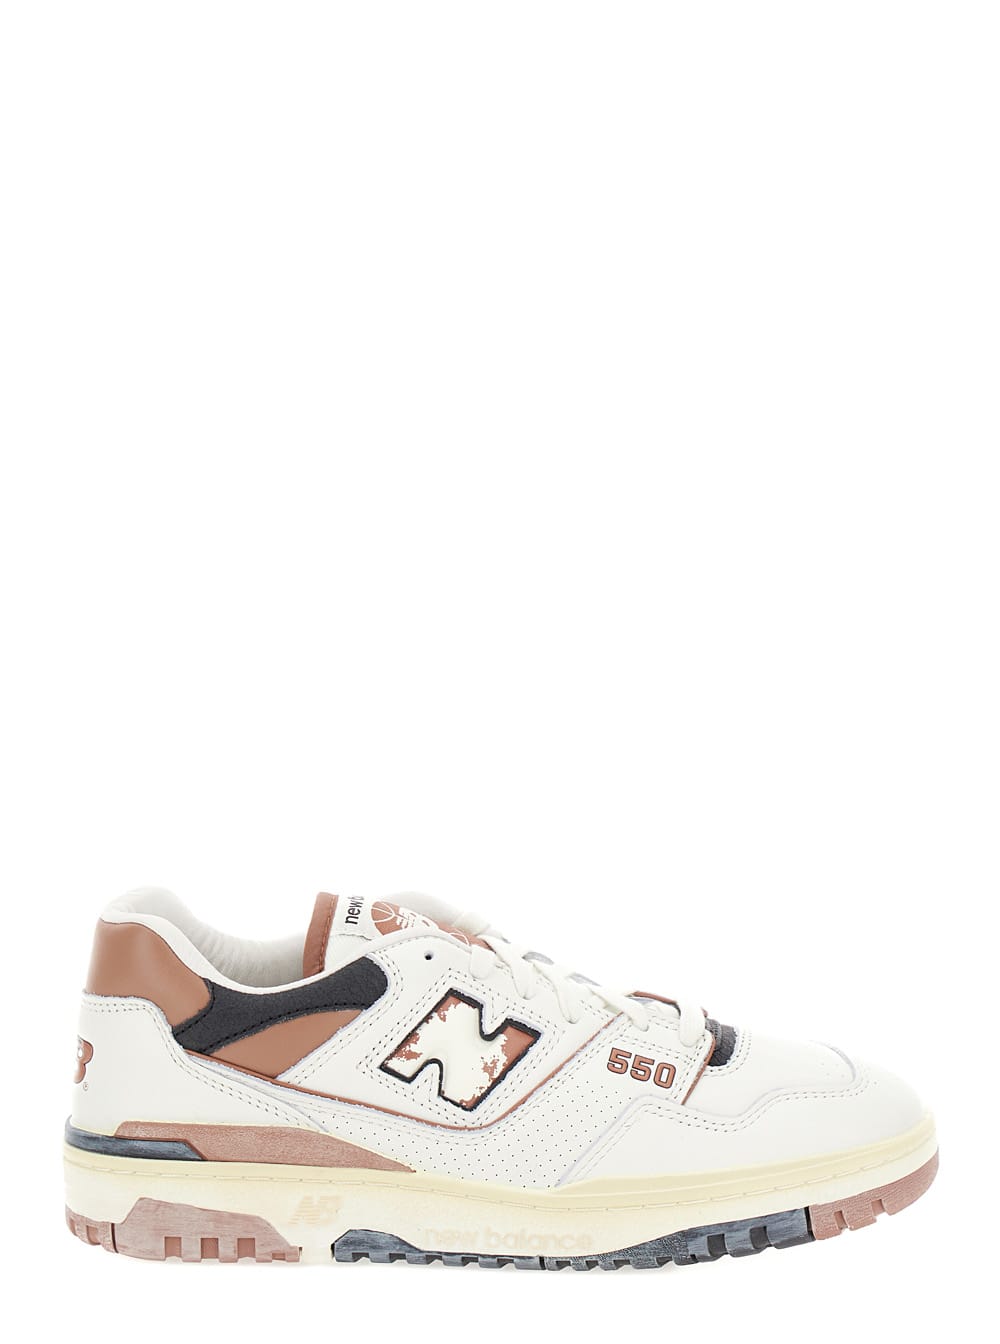 550 White And Brown Low Top Sneakers With Logo And Contrasting Details In Leather Man